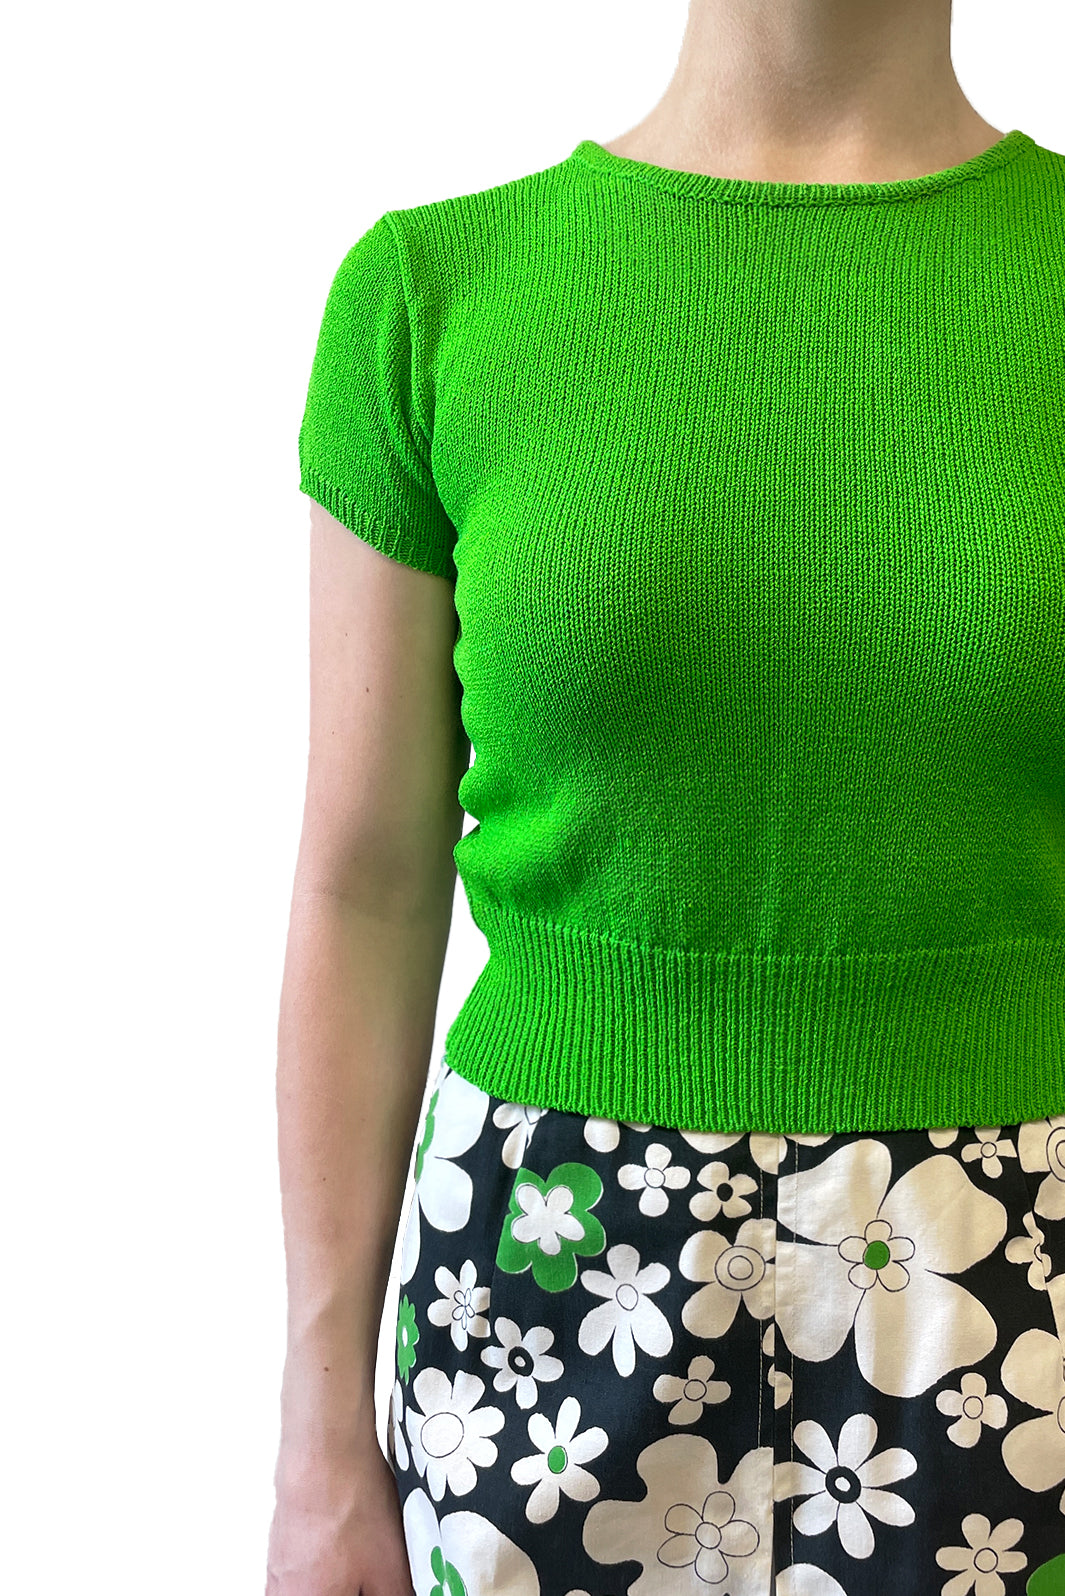 James Coviello for Anna Sui Cropped Green Sweater Top